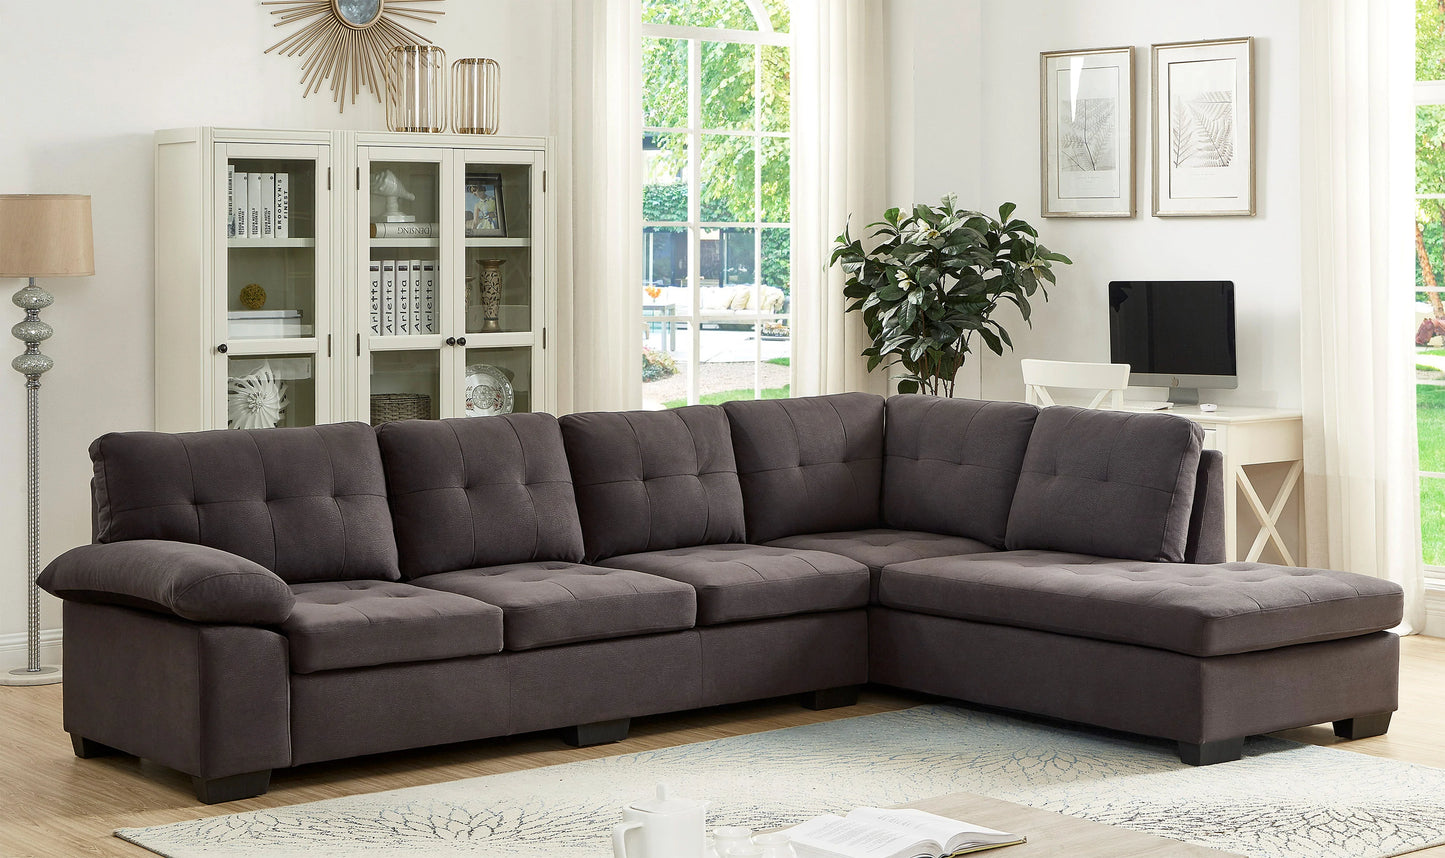 2 pc dark gray fabric sectional sofa set with tufted seat and backs